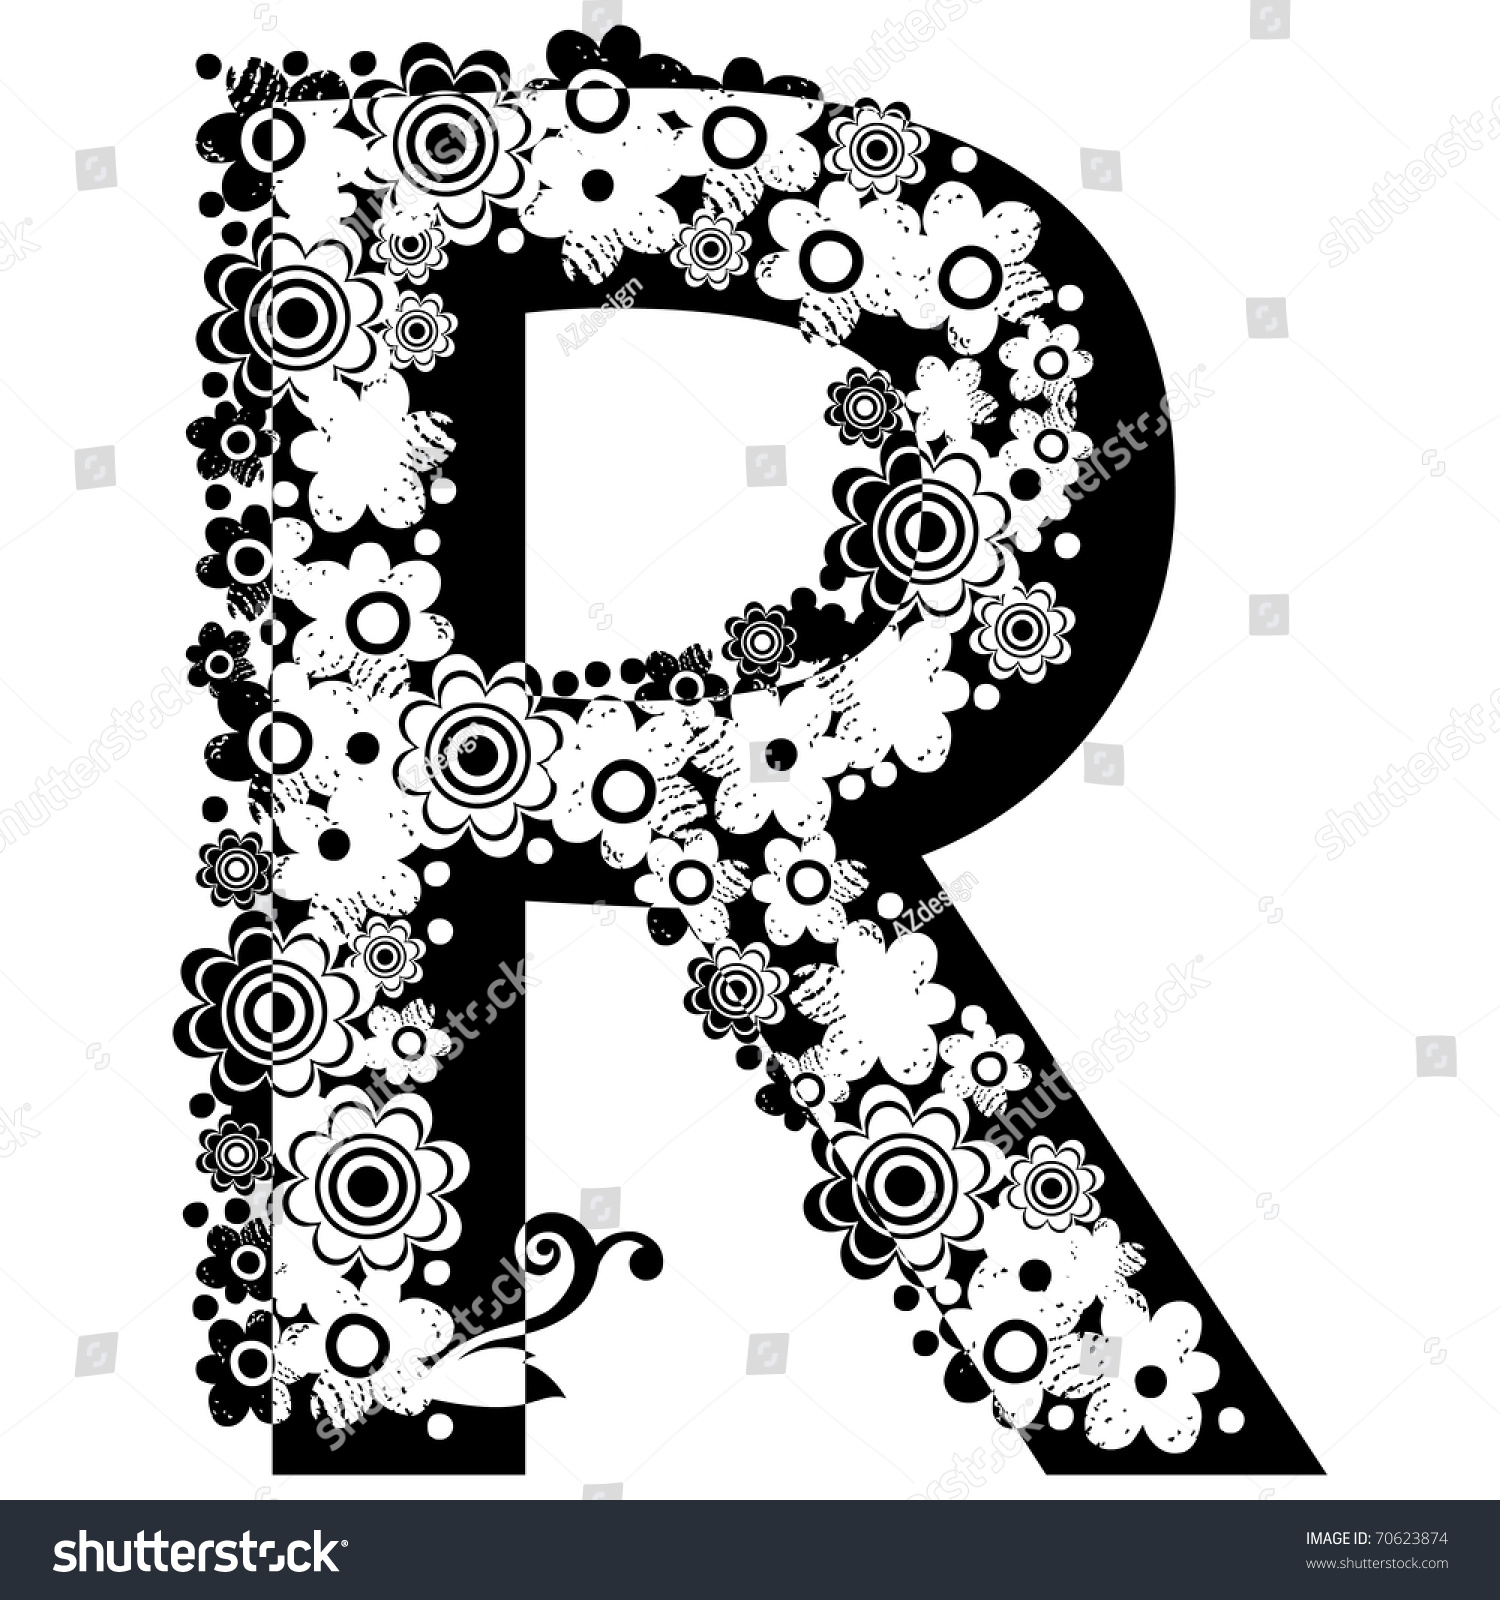 Royalty Free Black And White Floral Abc Letter R 70623874 Stock